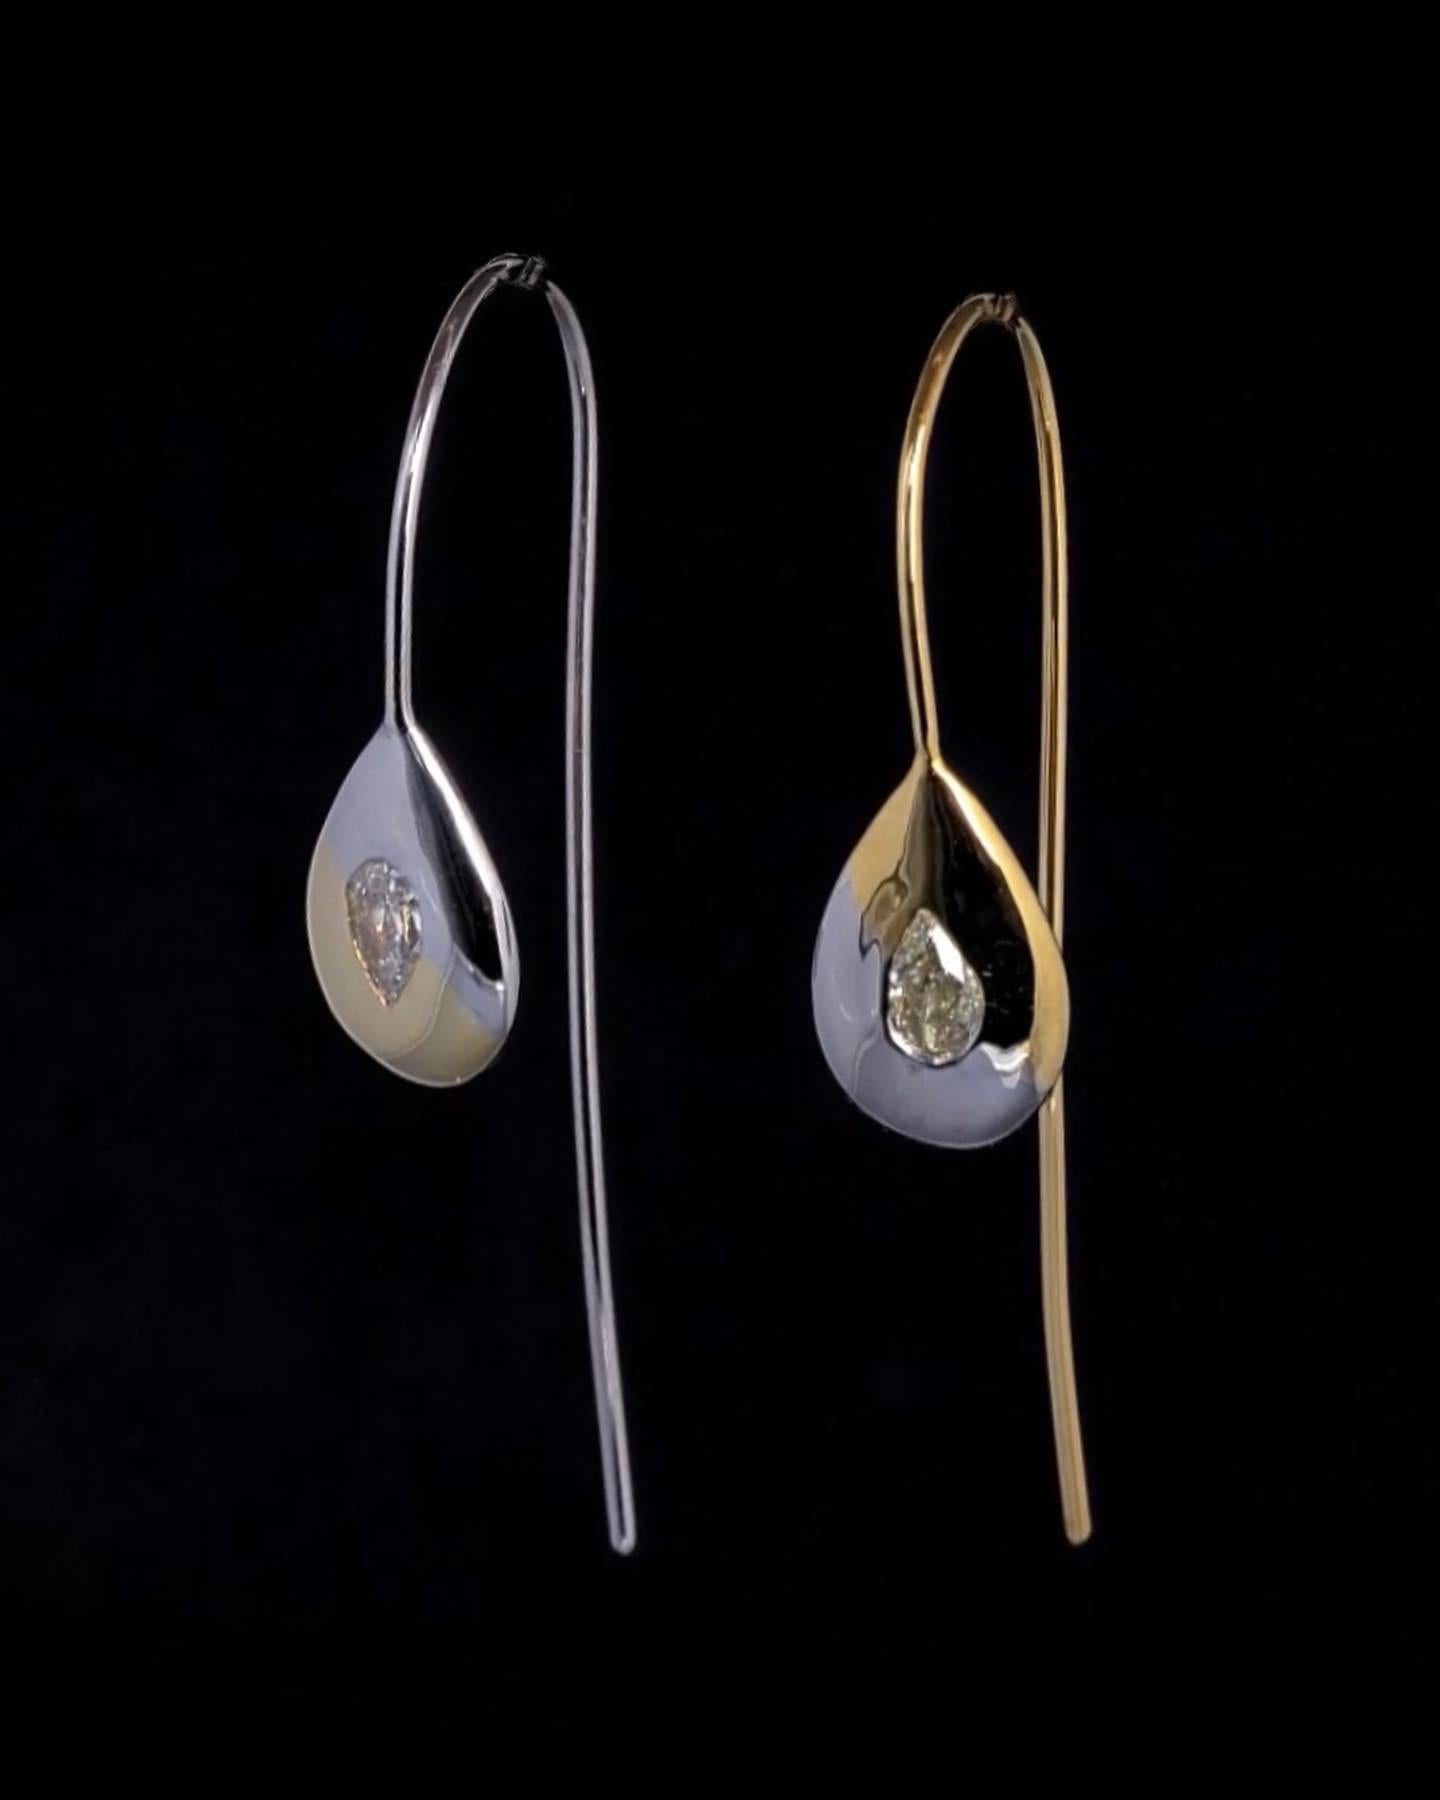 Two tone drop earrings with opposite but corresponding gold and diamond colors. One earring has a white gold base with a white diamond pear shape and yellow gold accent, while the other has a yellow gold base with a yellow diamond pear shape and a